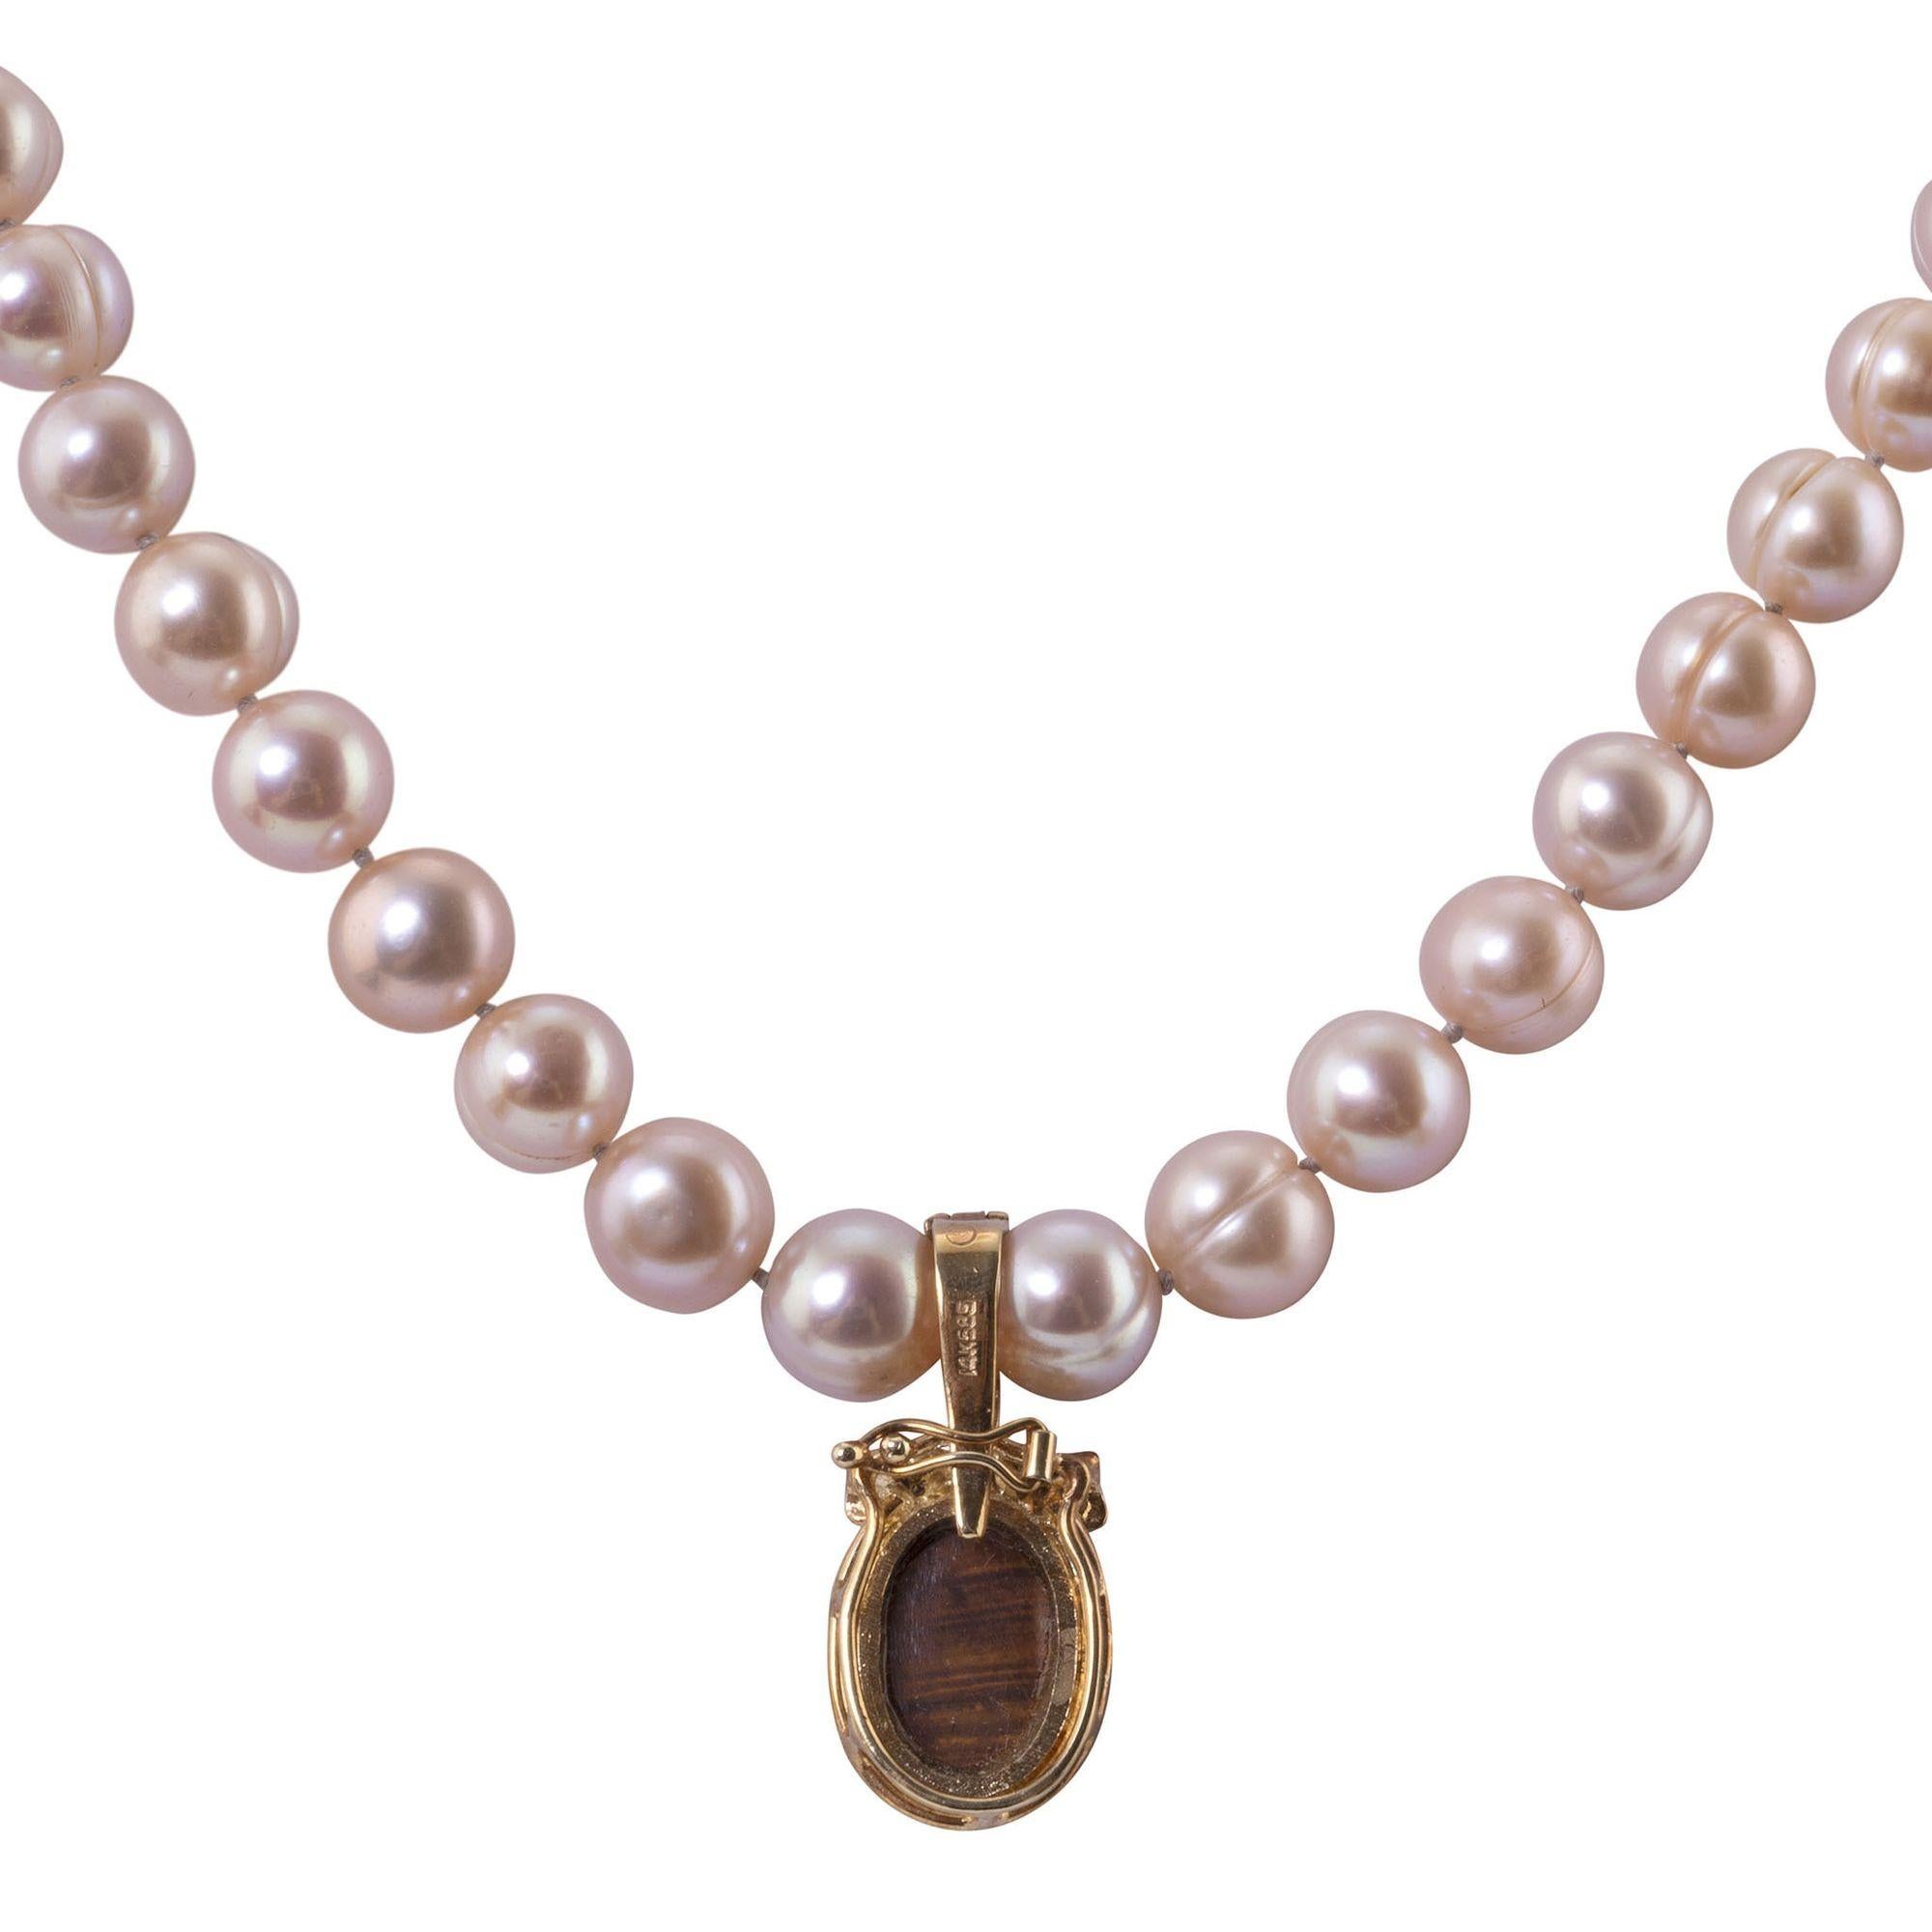 Estate opal enhancer pendant on pearl necklace. This necklace features 50 light rose colored cultured pearls at 8.5mm. The necklace comes with a 14 karat yellow gold enhancer pendant with a 3 carat opal and .08 carat total weight in accent diamonds.